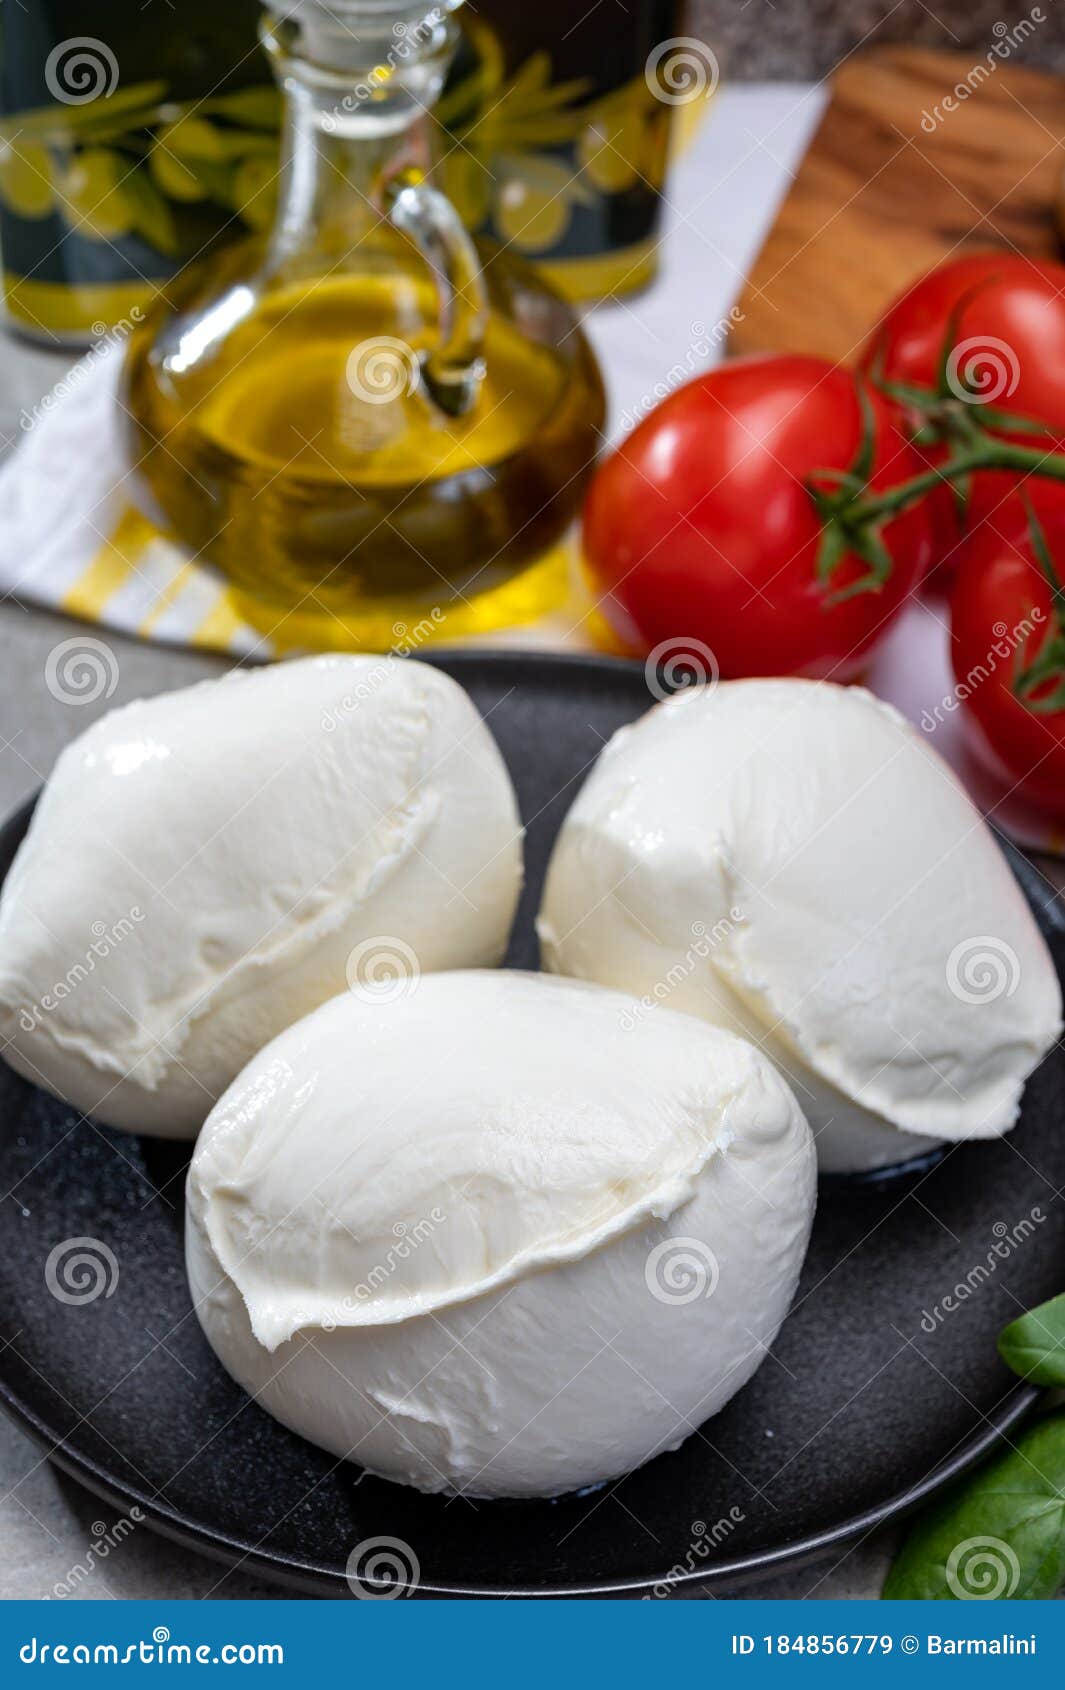 Fresh Handmade Soft Italian Cheese From Campania, White Balls Of Buffalo  Mozzarella Cheese Made From Cow Milk Ready To Eat Stock Image - Image of  hand, appetizer: 184856779